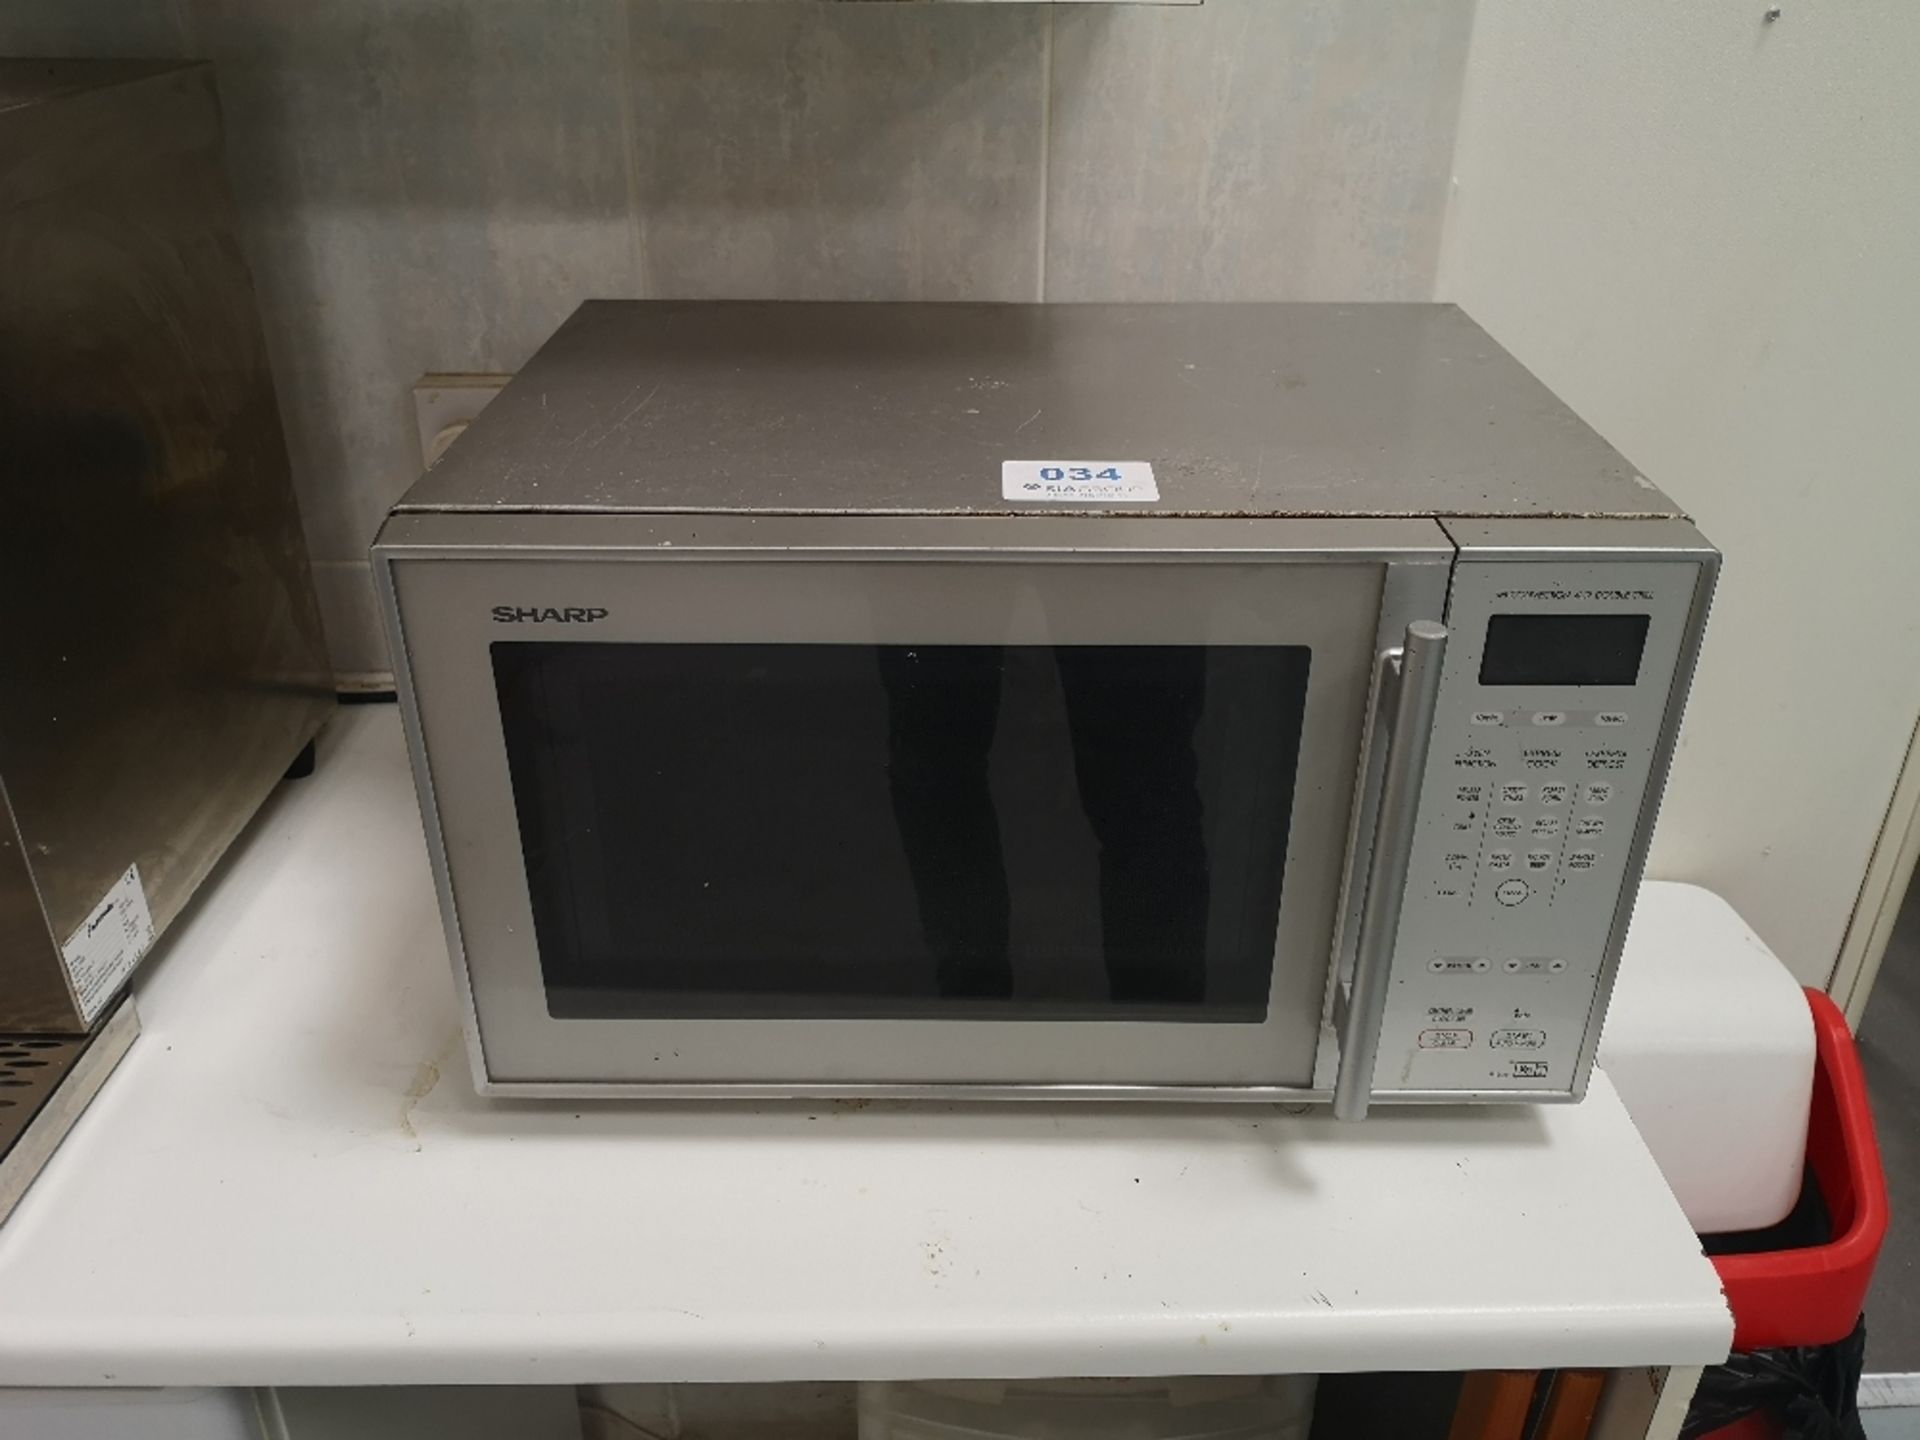 Sharp Jet Convection & Double Grill Microwave Oven